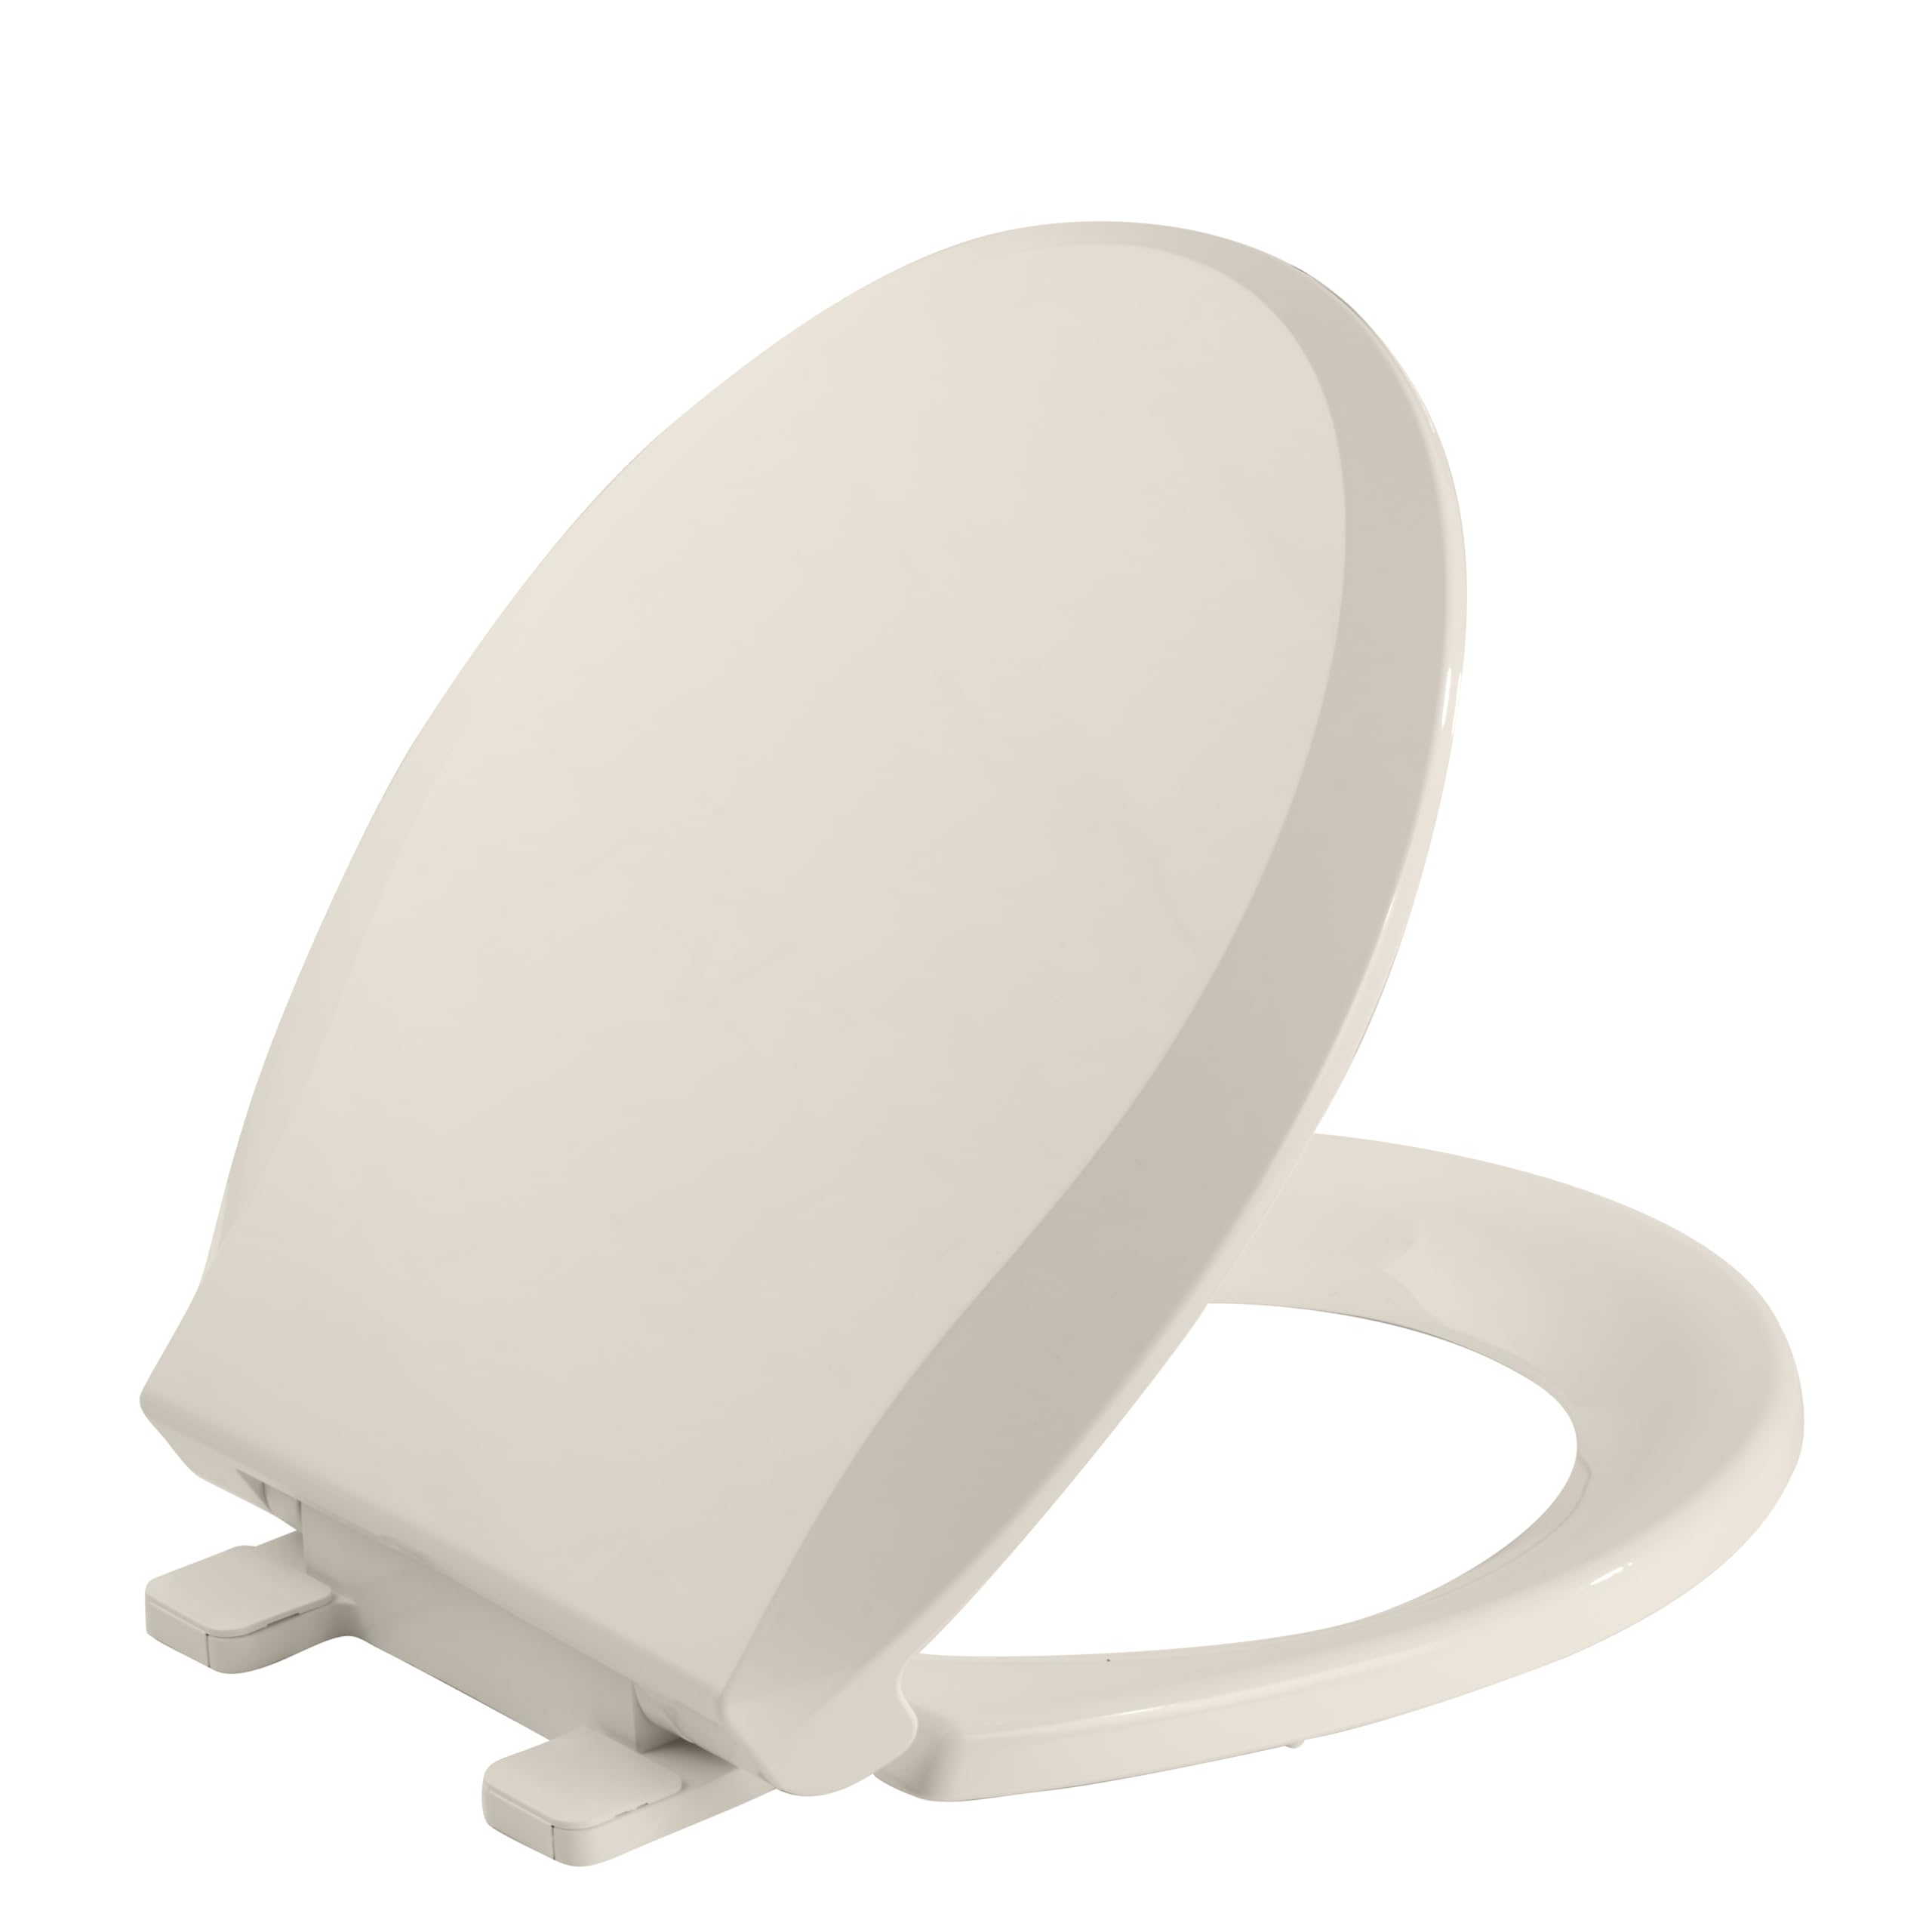 Durable Round Toilet Seat with Slow Soft Close - Easy to Install and Clean, Never Loosens - White, Fits Most Round Toilets Almond